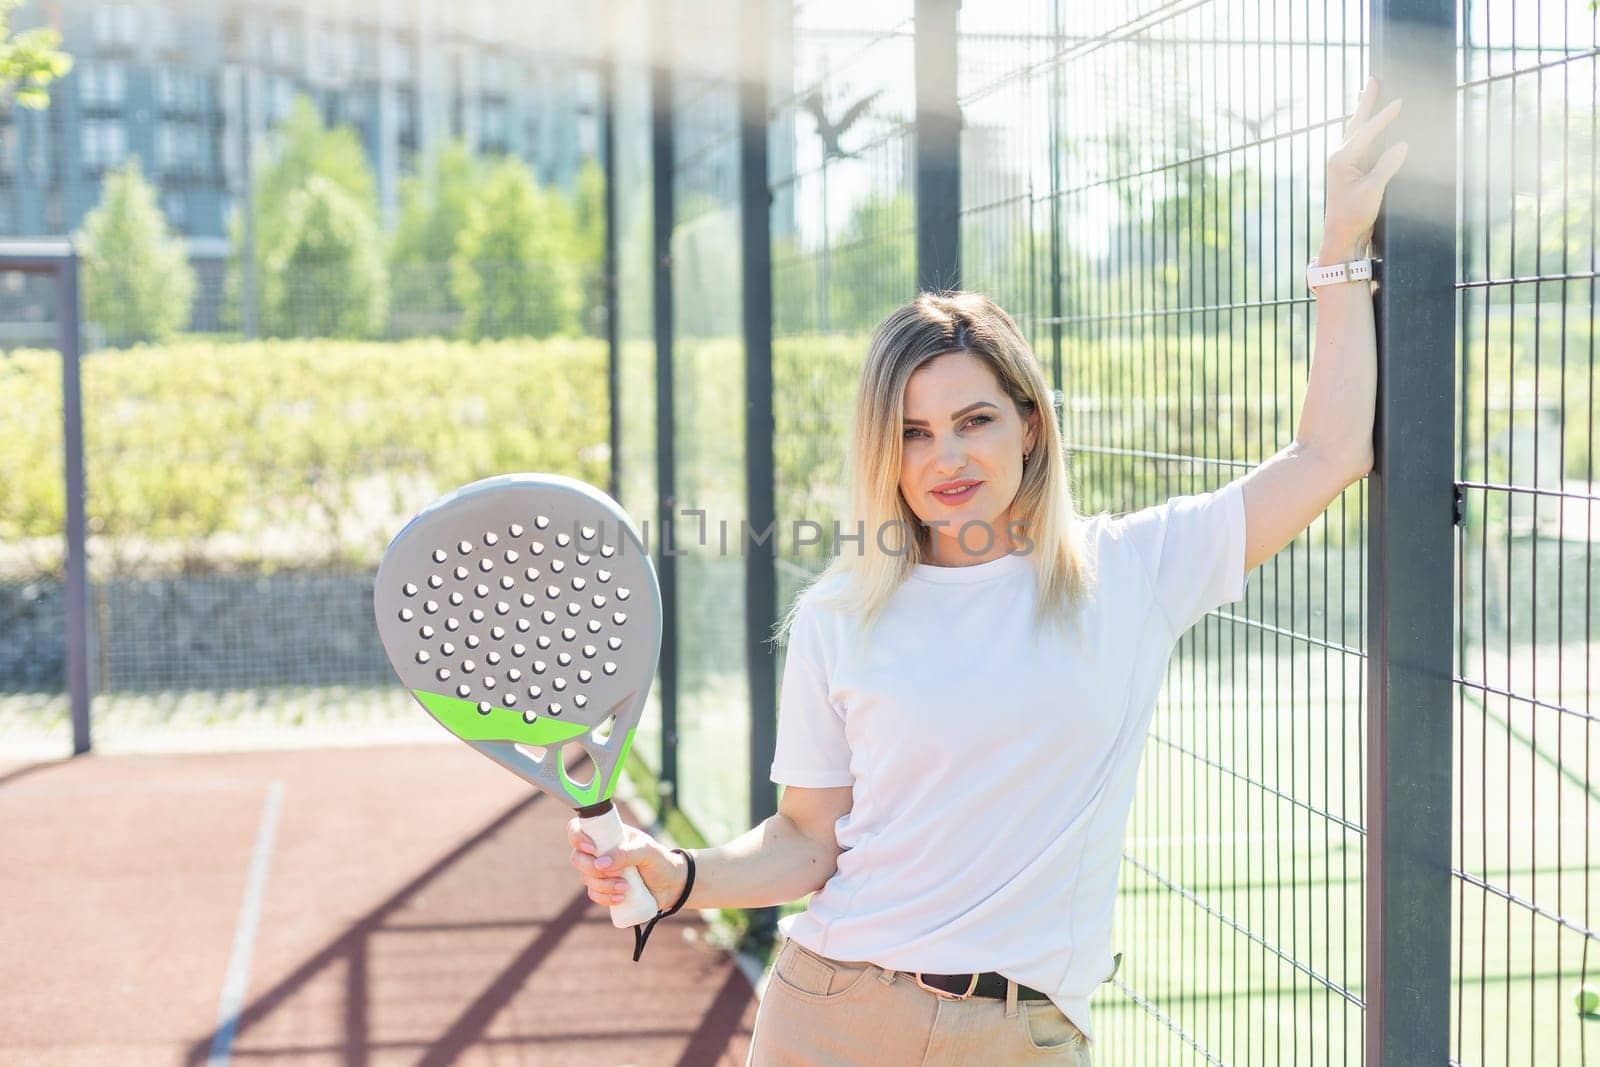 Young sporty woman padel player hitting ball with a racket on a hard court. High quality photo